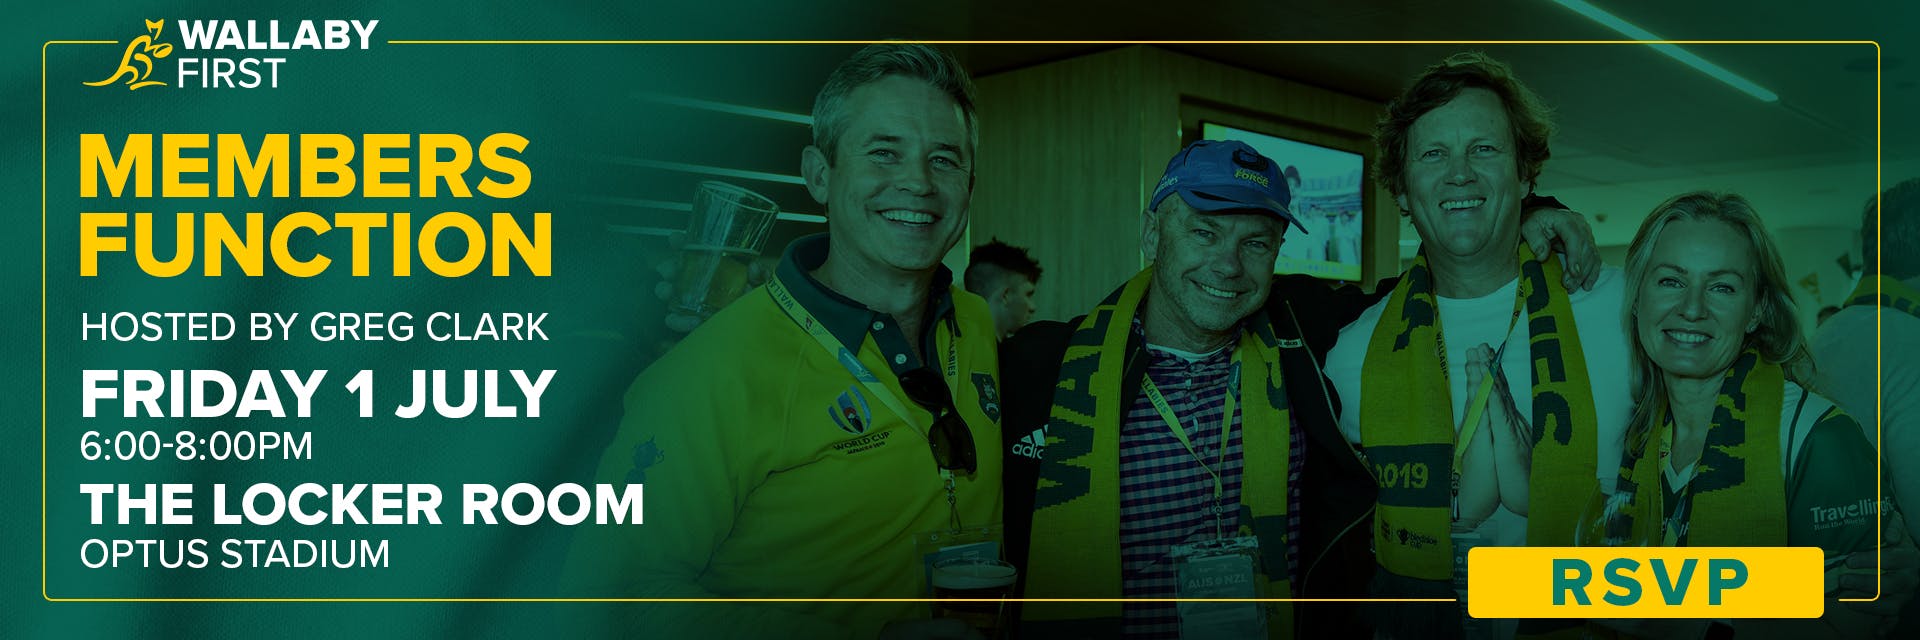 Wallaby First Perth Function